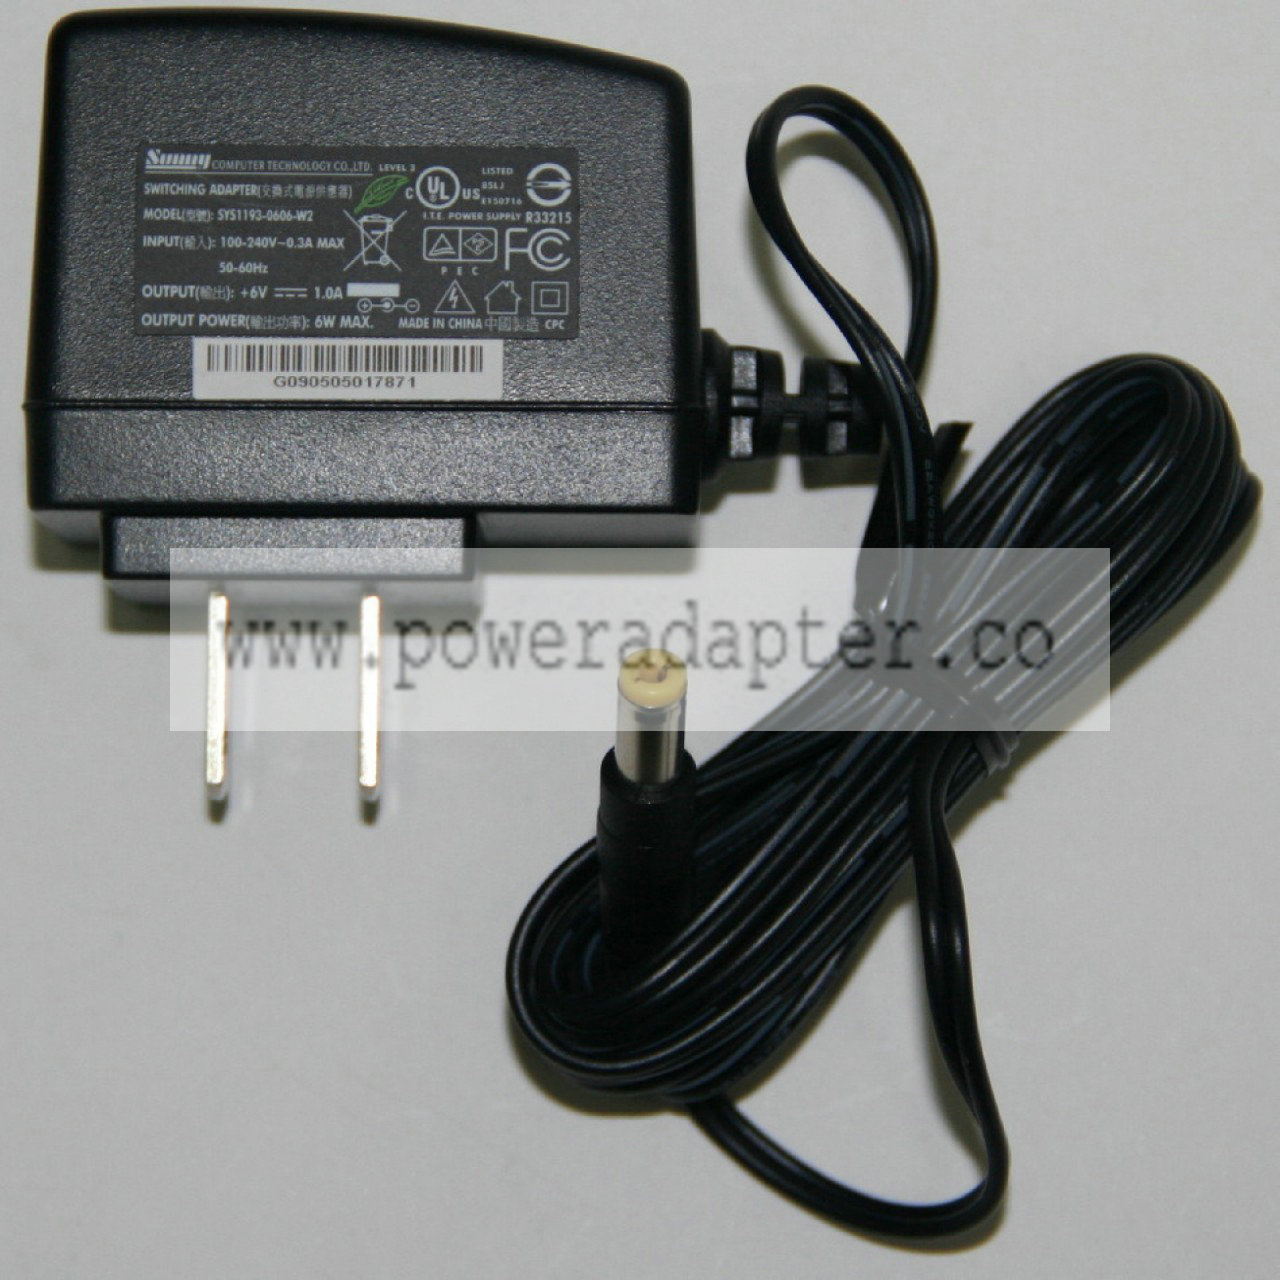 Akai MP6-1 AC Adapter for MPD24 and MPK49 (optional) Product Description Akai MP6-I AC Adapter for MPD24 and MPK49 (op - Click Image to Close